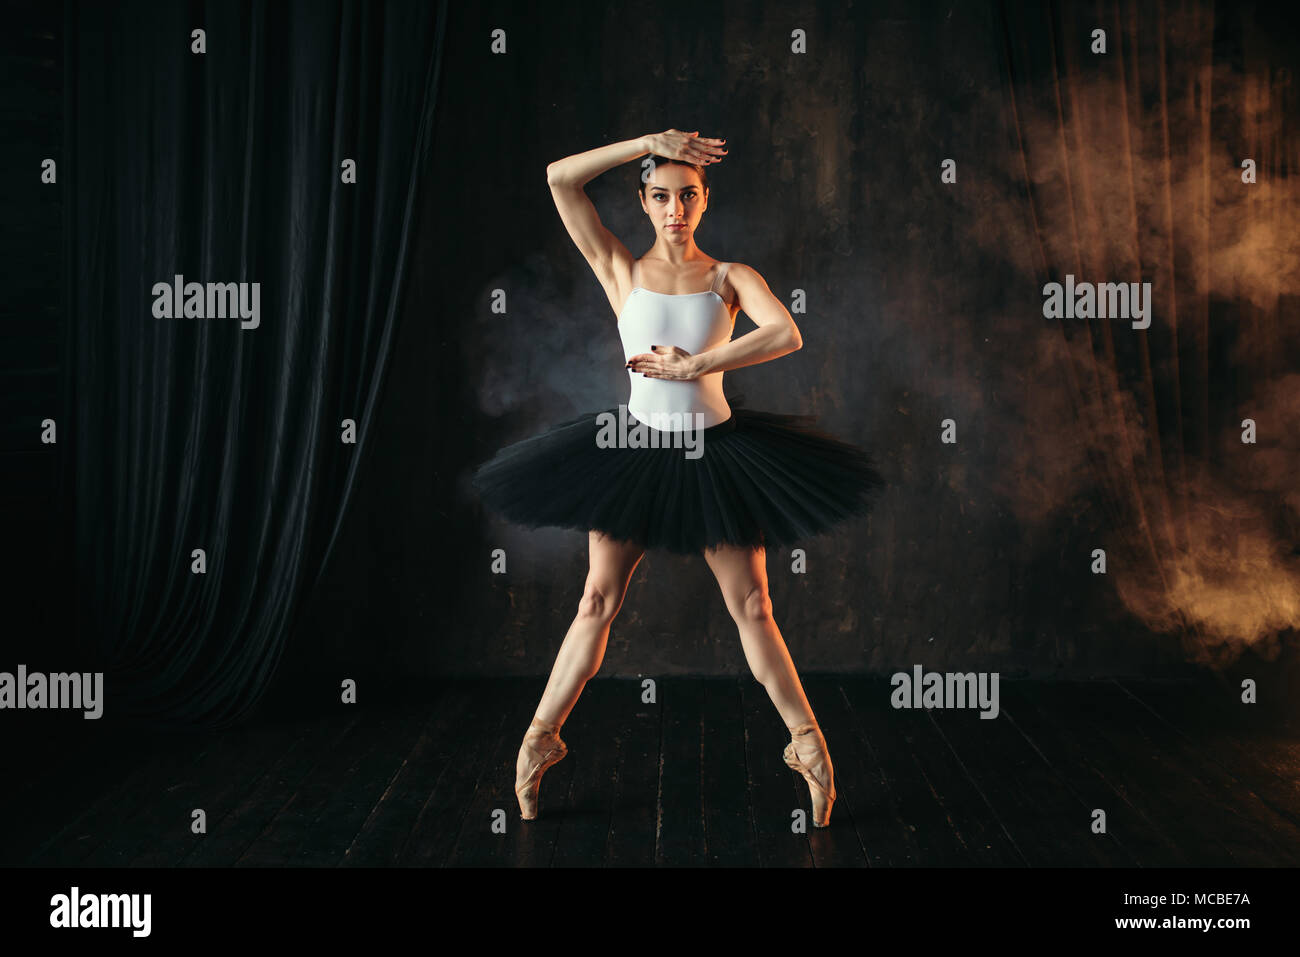 Elegance ballerina in action on theatrical stage Stock Photo